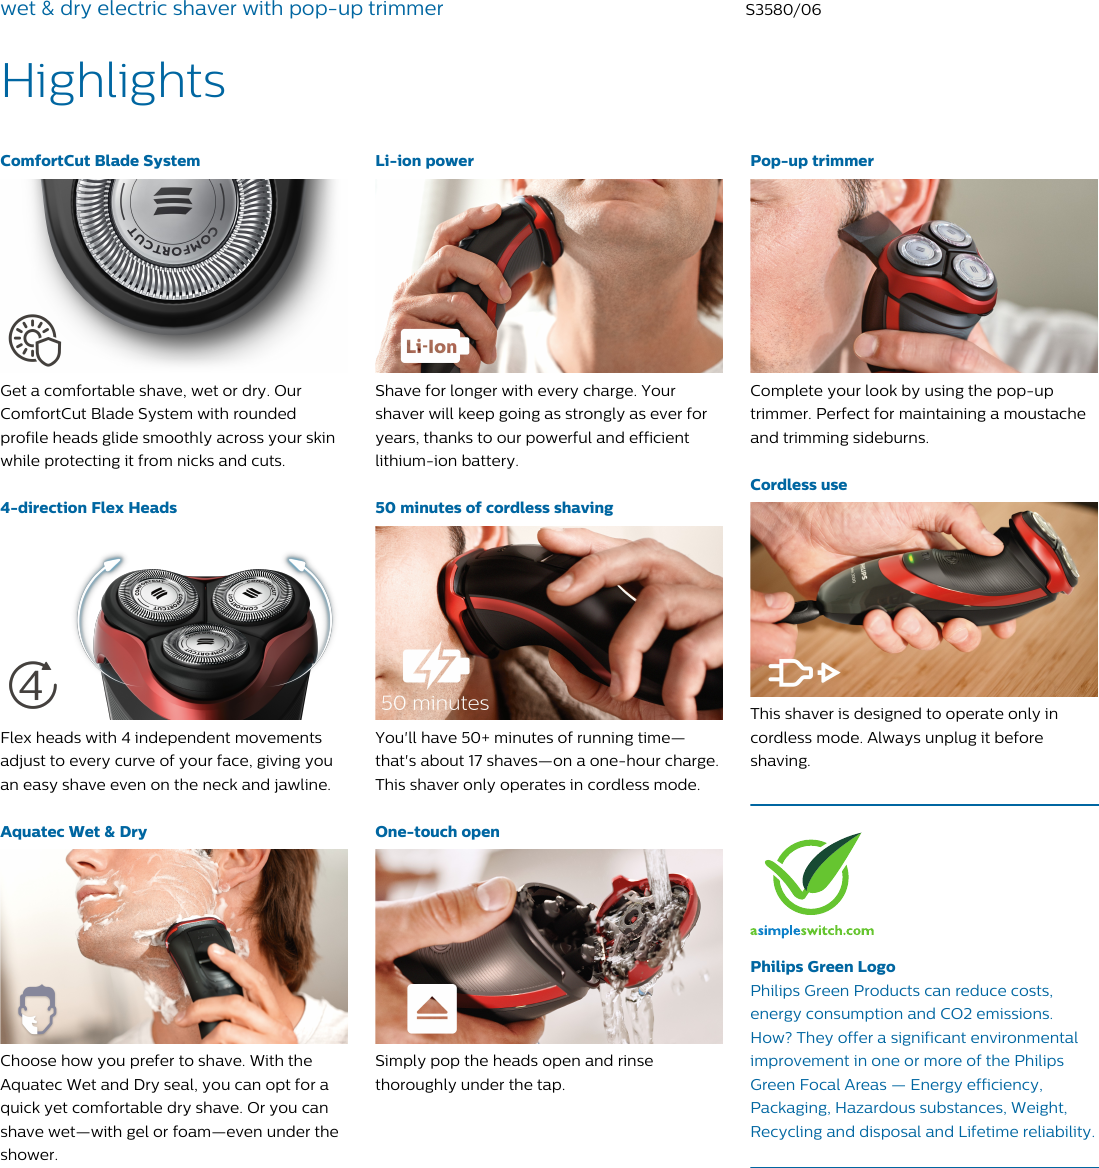 Page 2 of 3 - Philips S3580/06 Wet & Dry Electric Shaver With Pop-up Trimmer User Manual Leaflet S3580 06 Pss Enggb